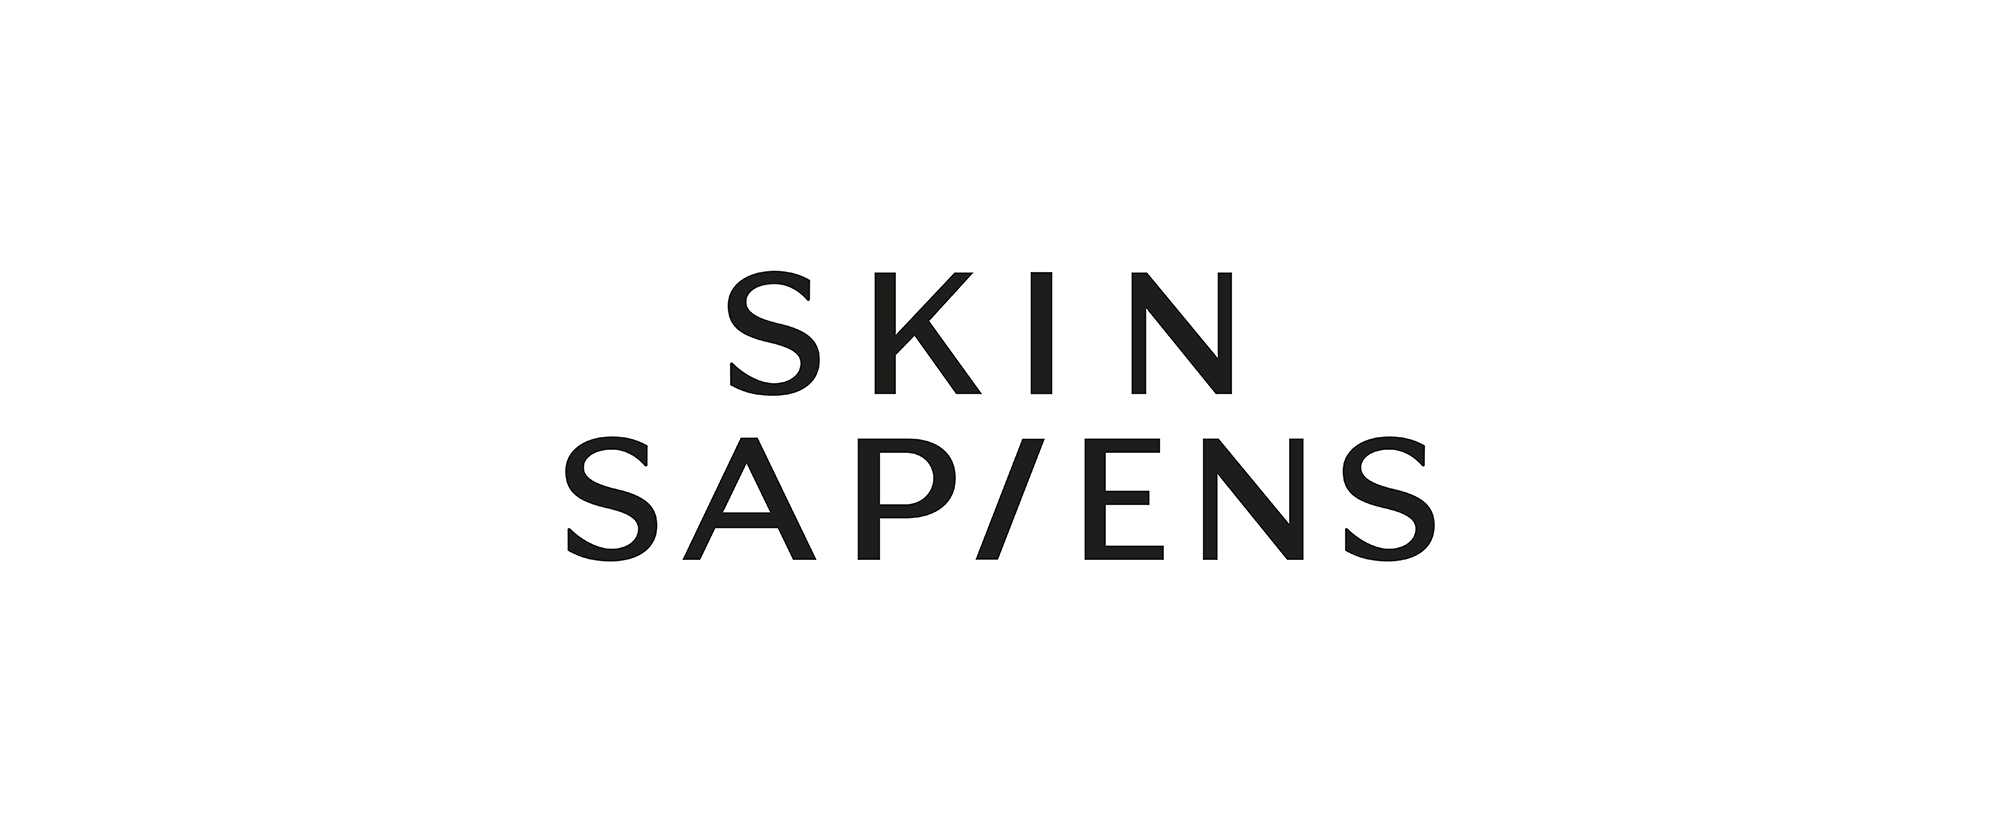 New Logo and Packaging for Skin Sapiens by Lewis Moberly